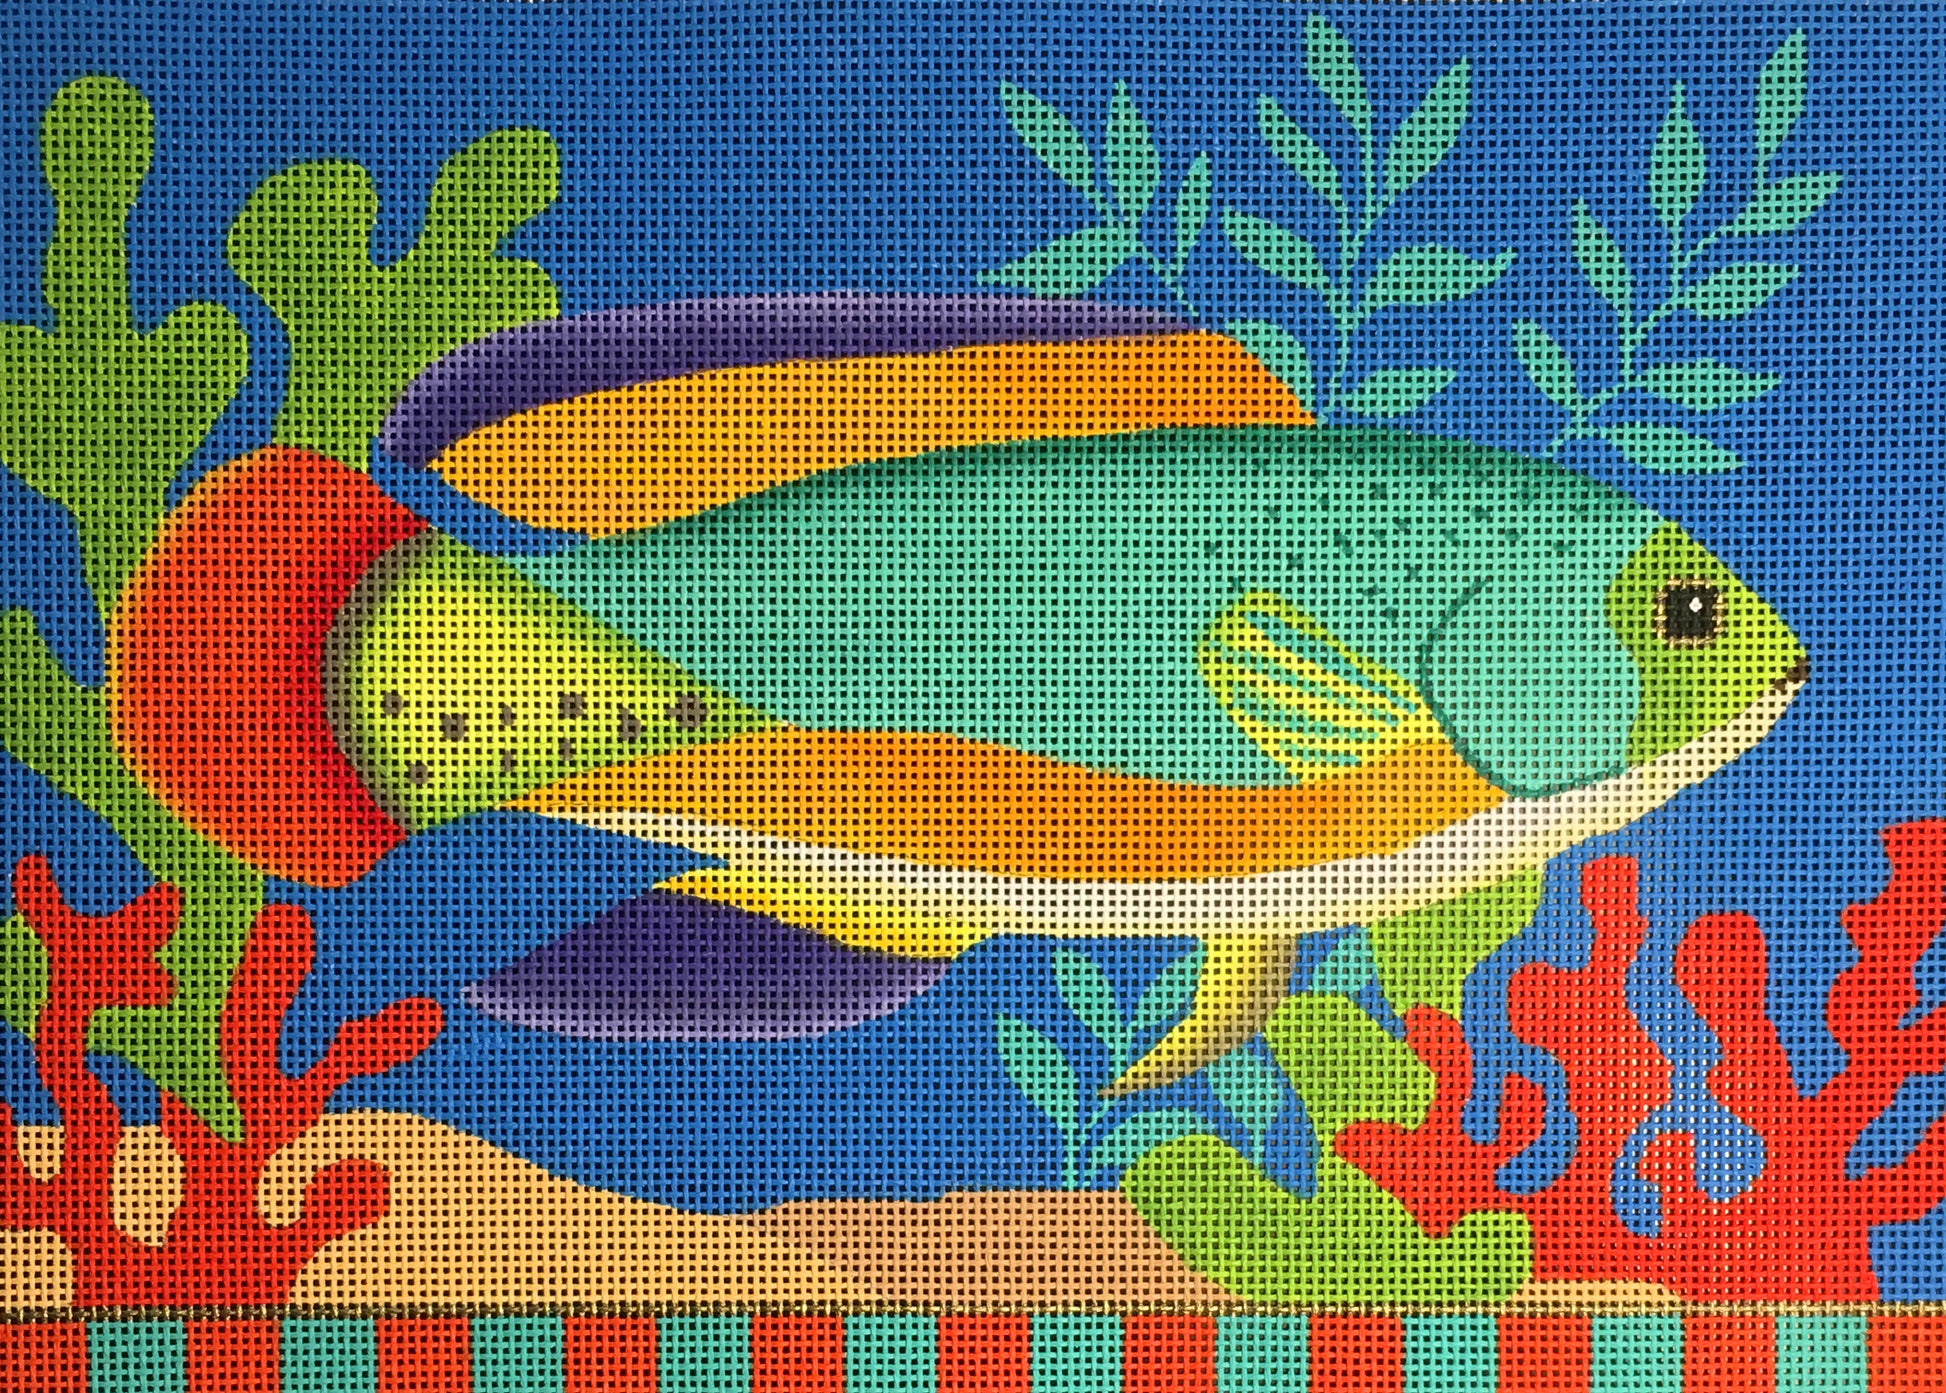 Amanda Lawford bright tropical fish needlepoint canvas with checkered border